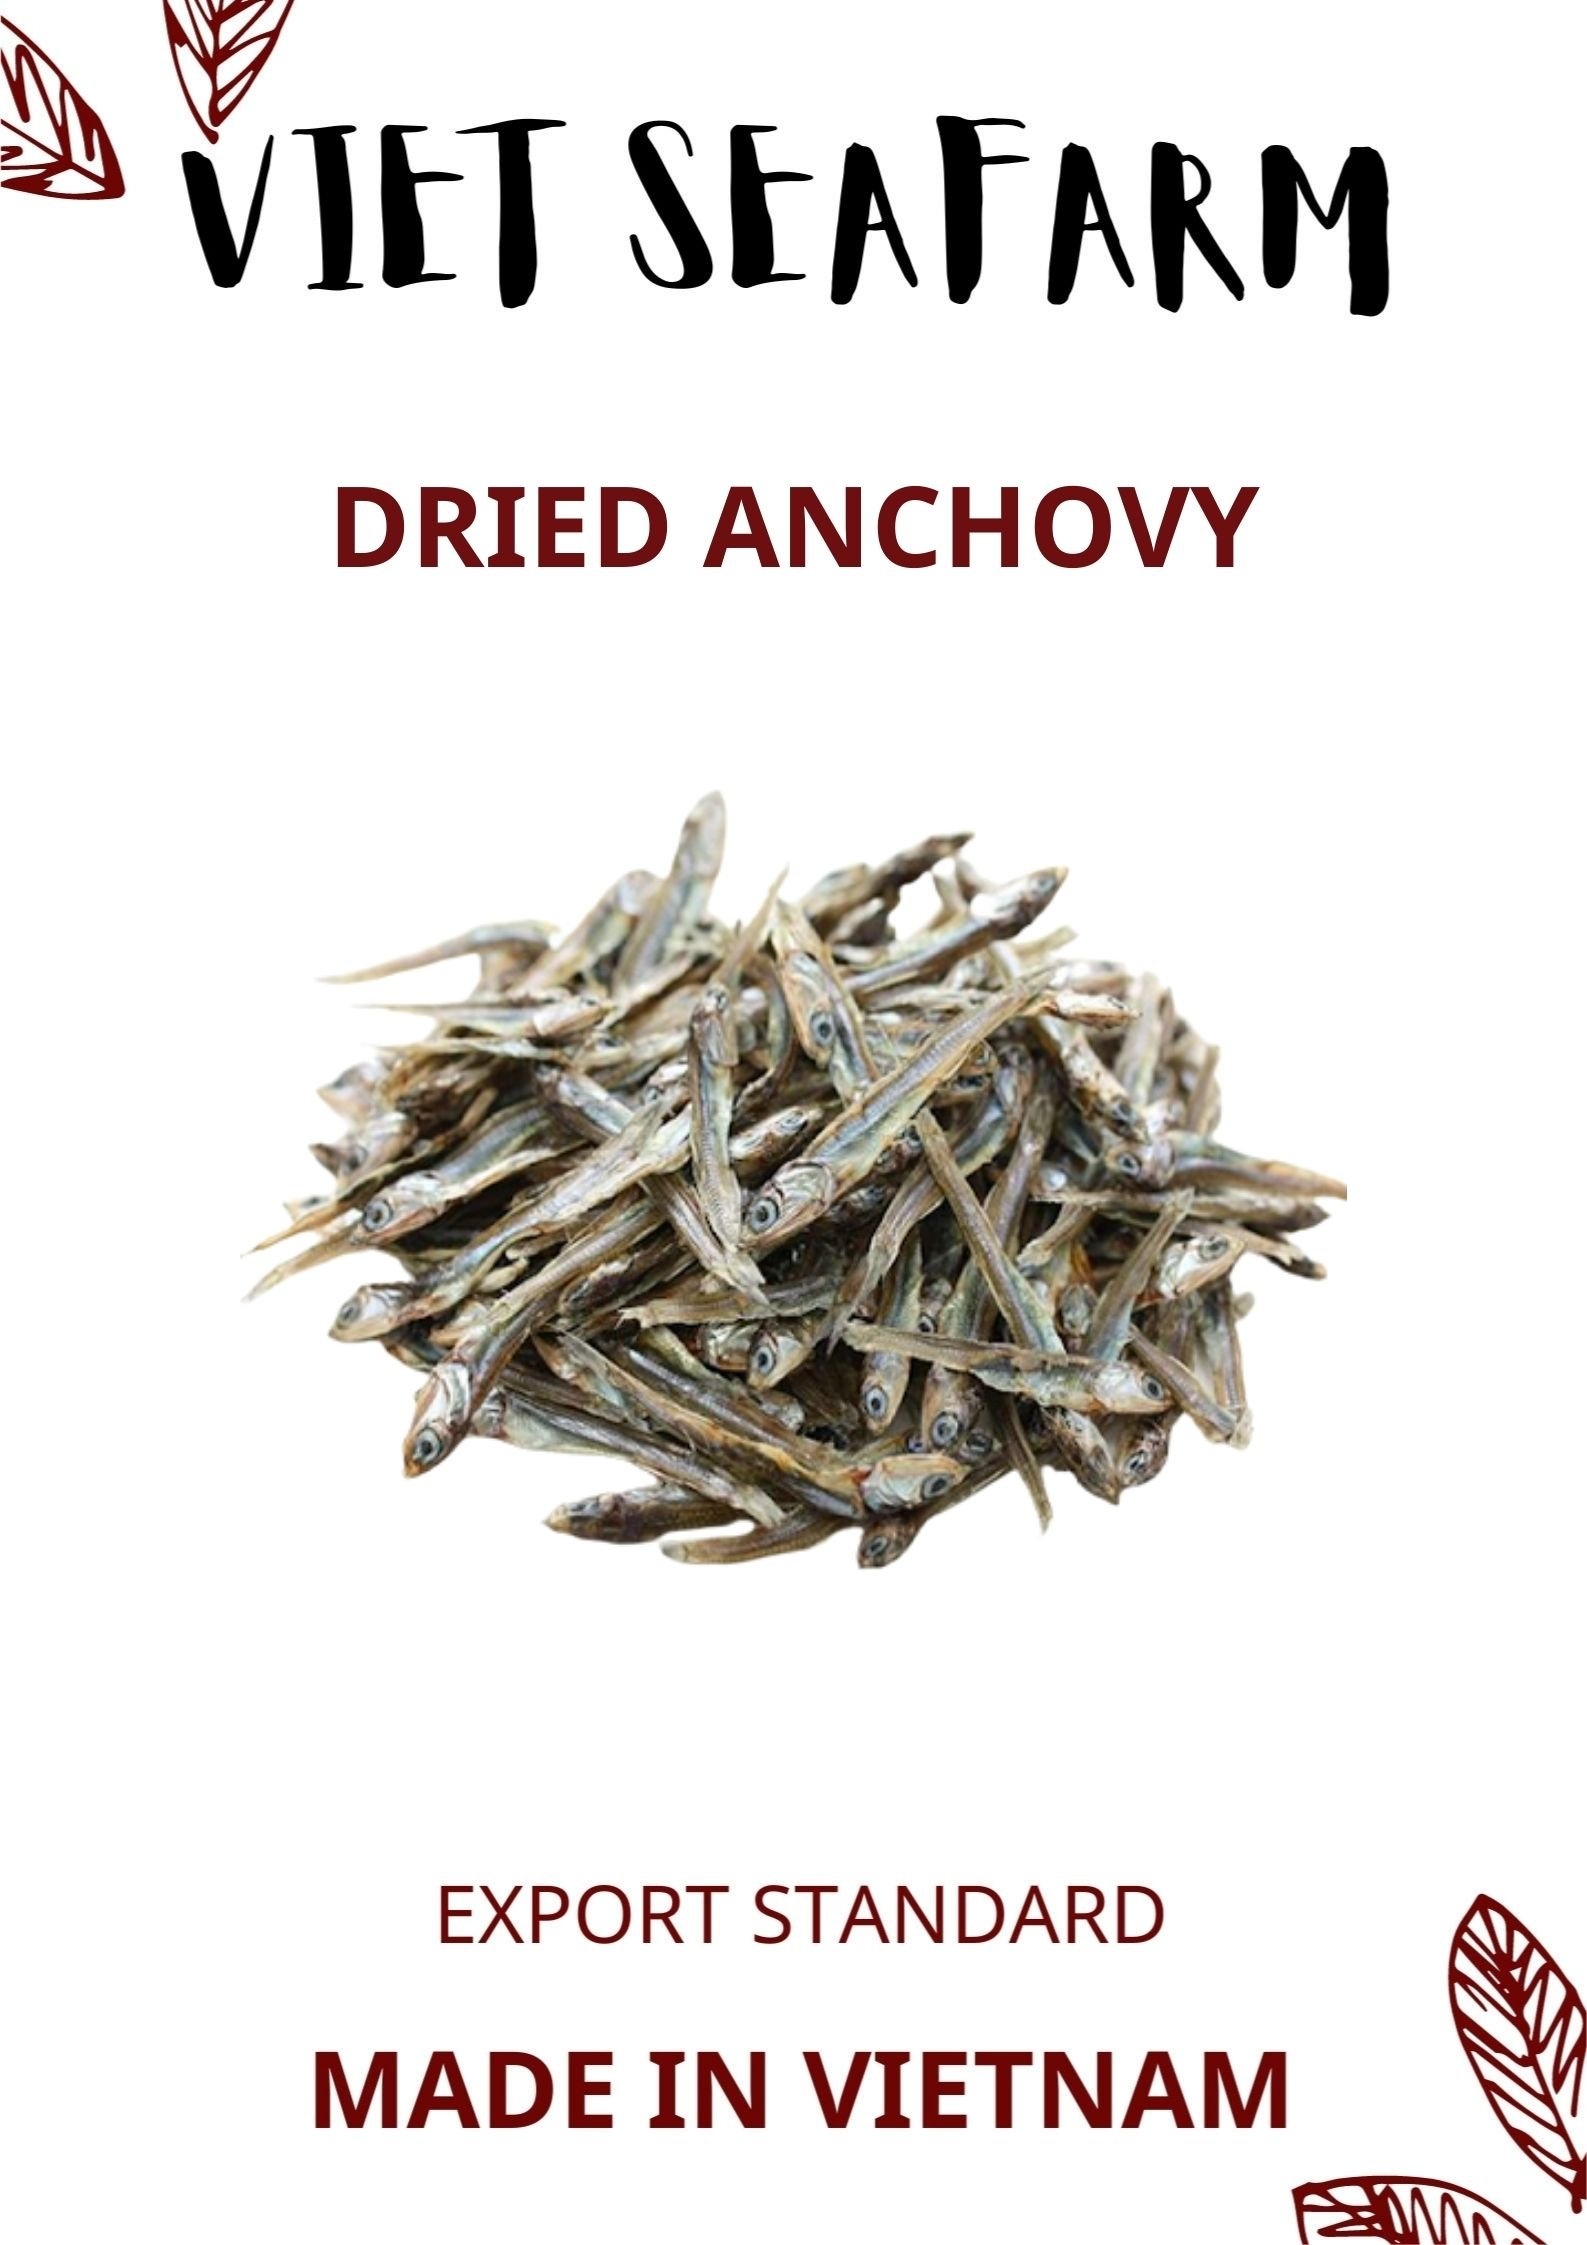 Dried anchovy (sprats)